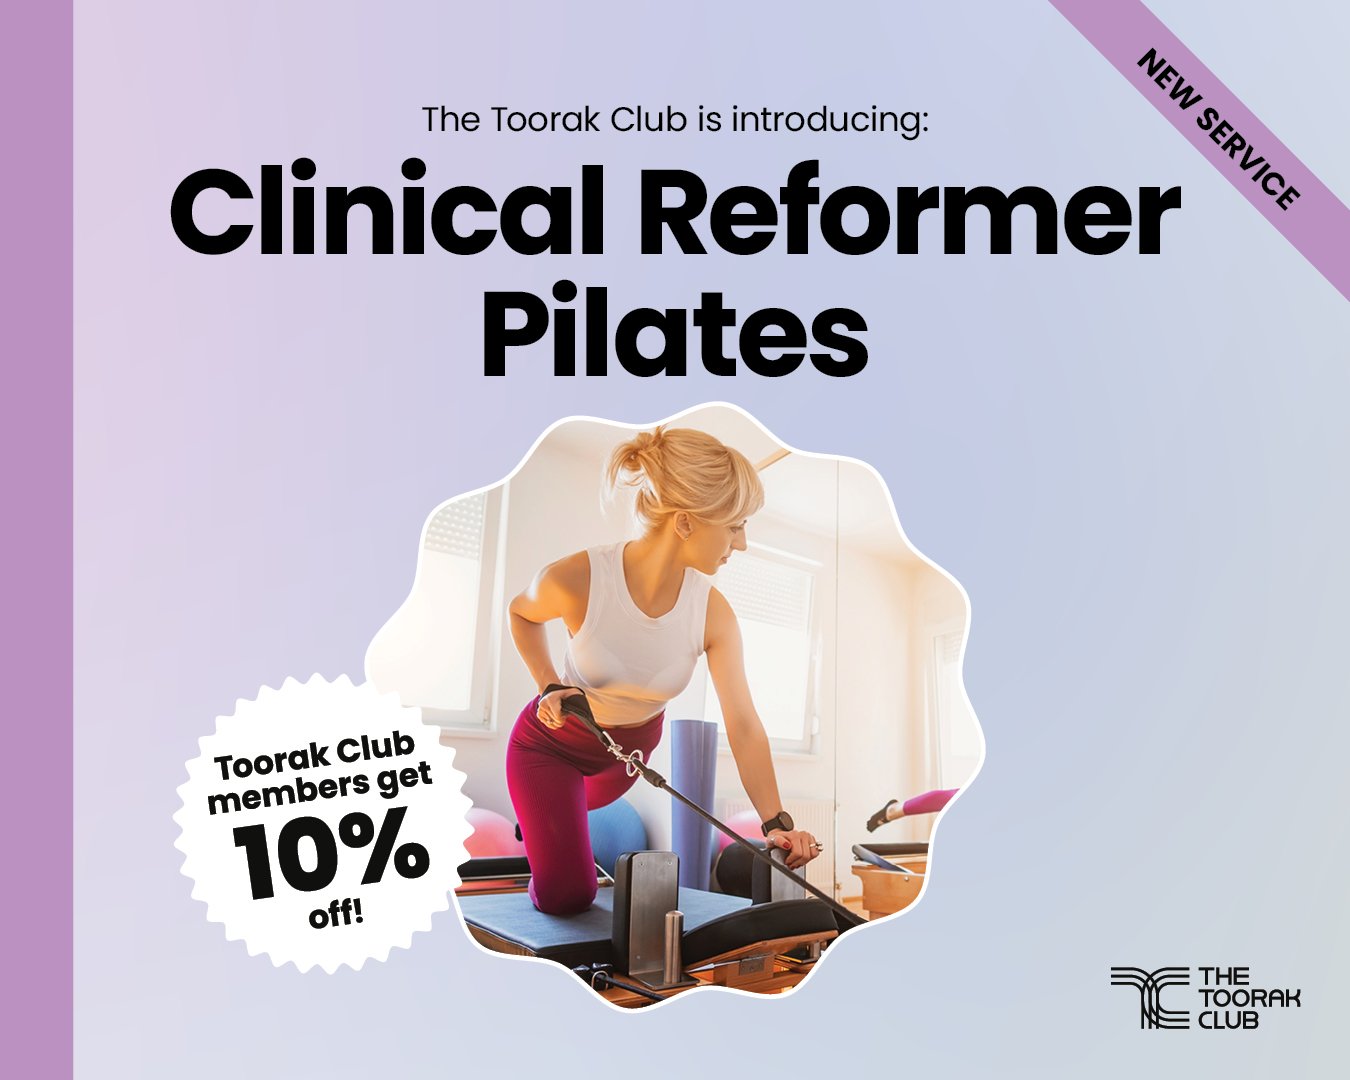 Ready to elevate your fitness and core stability? Look no further than our personalised Clinical Reformer Pilates sessions! 

Whether you're a beginner or a seasoned athlete, our one-on-one sessions are designed to meet your individual needs and goal